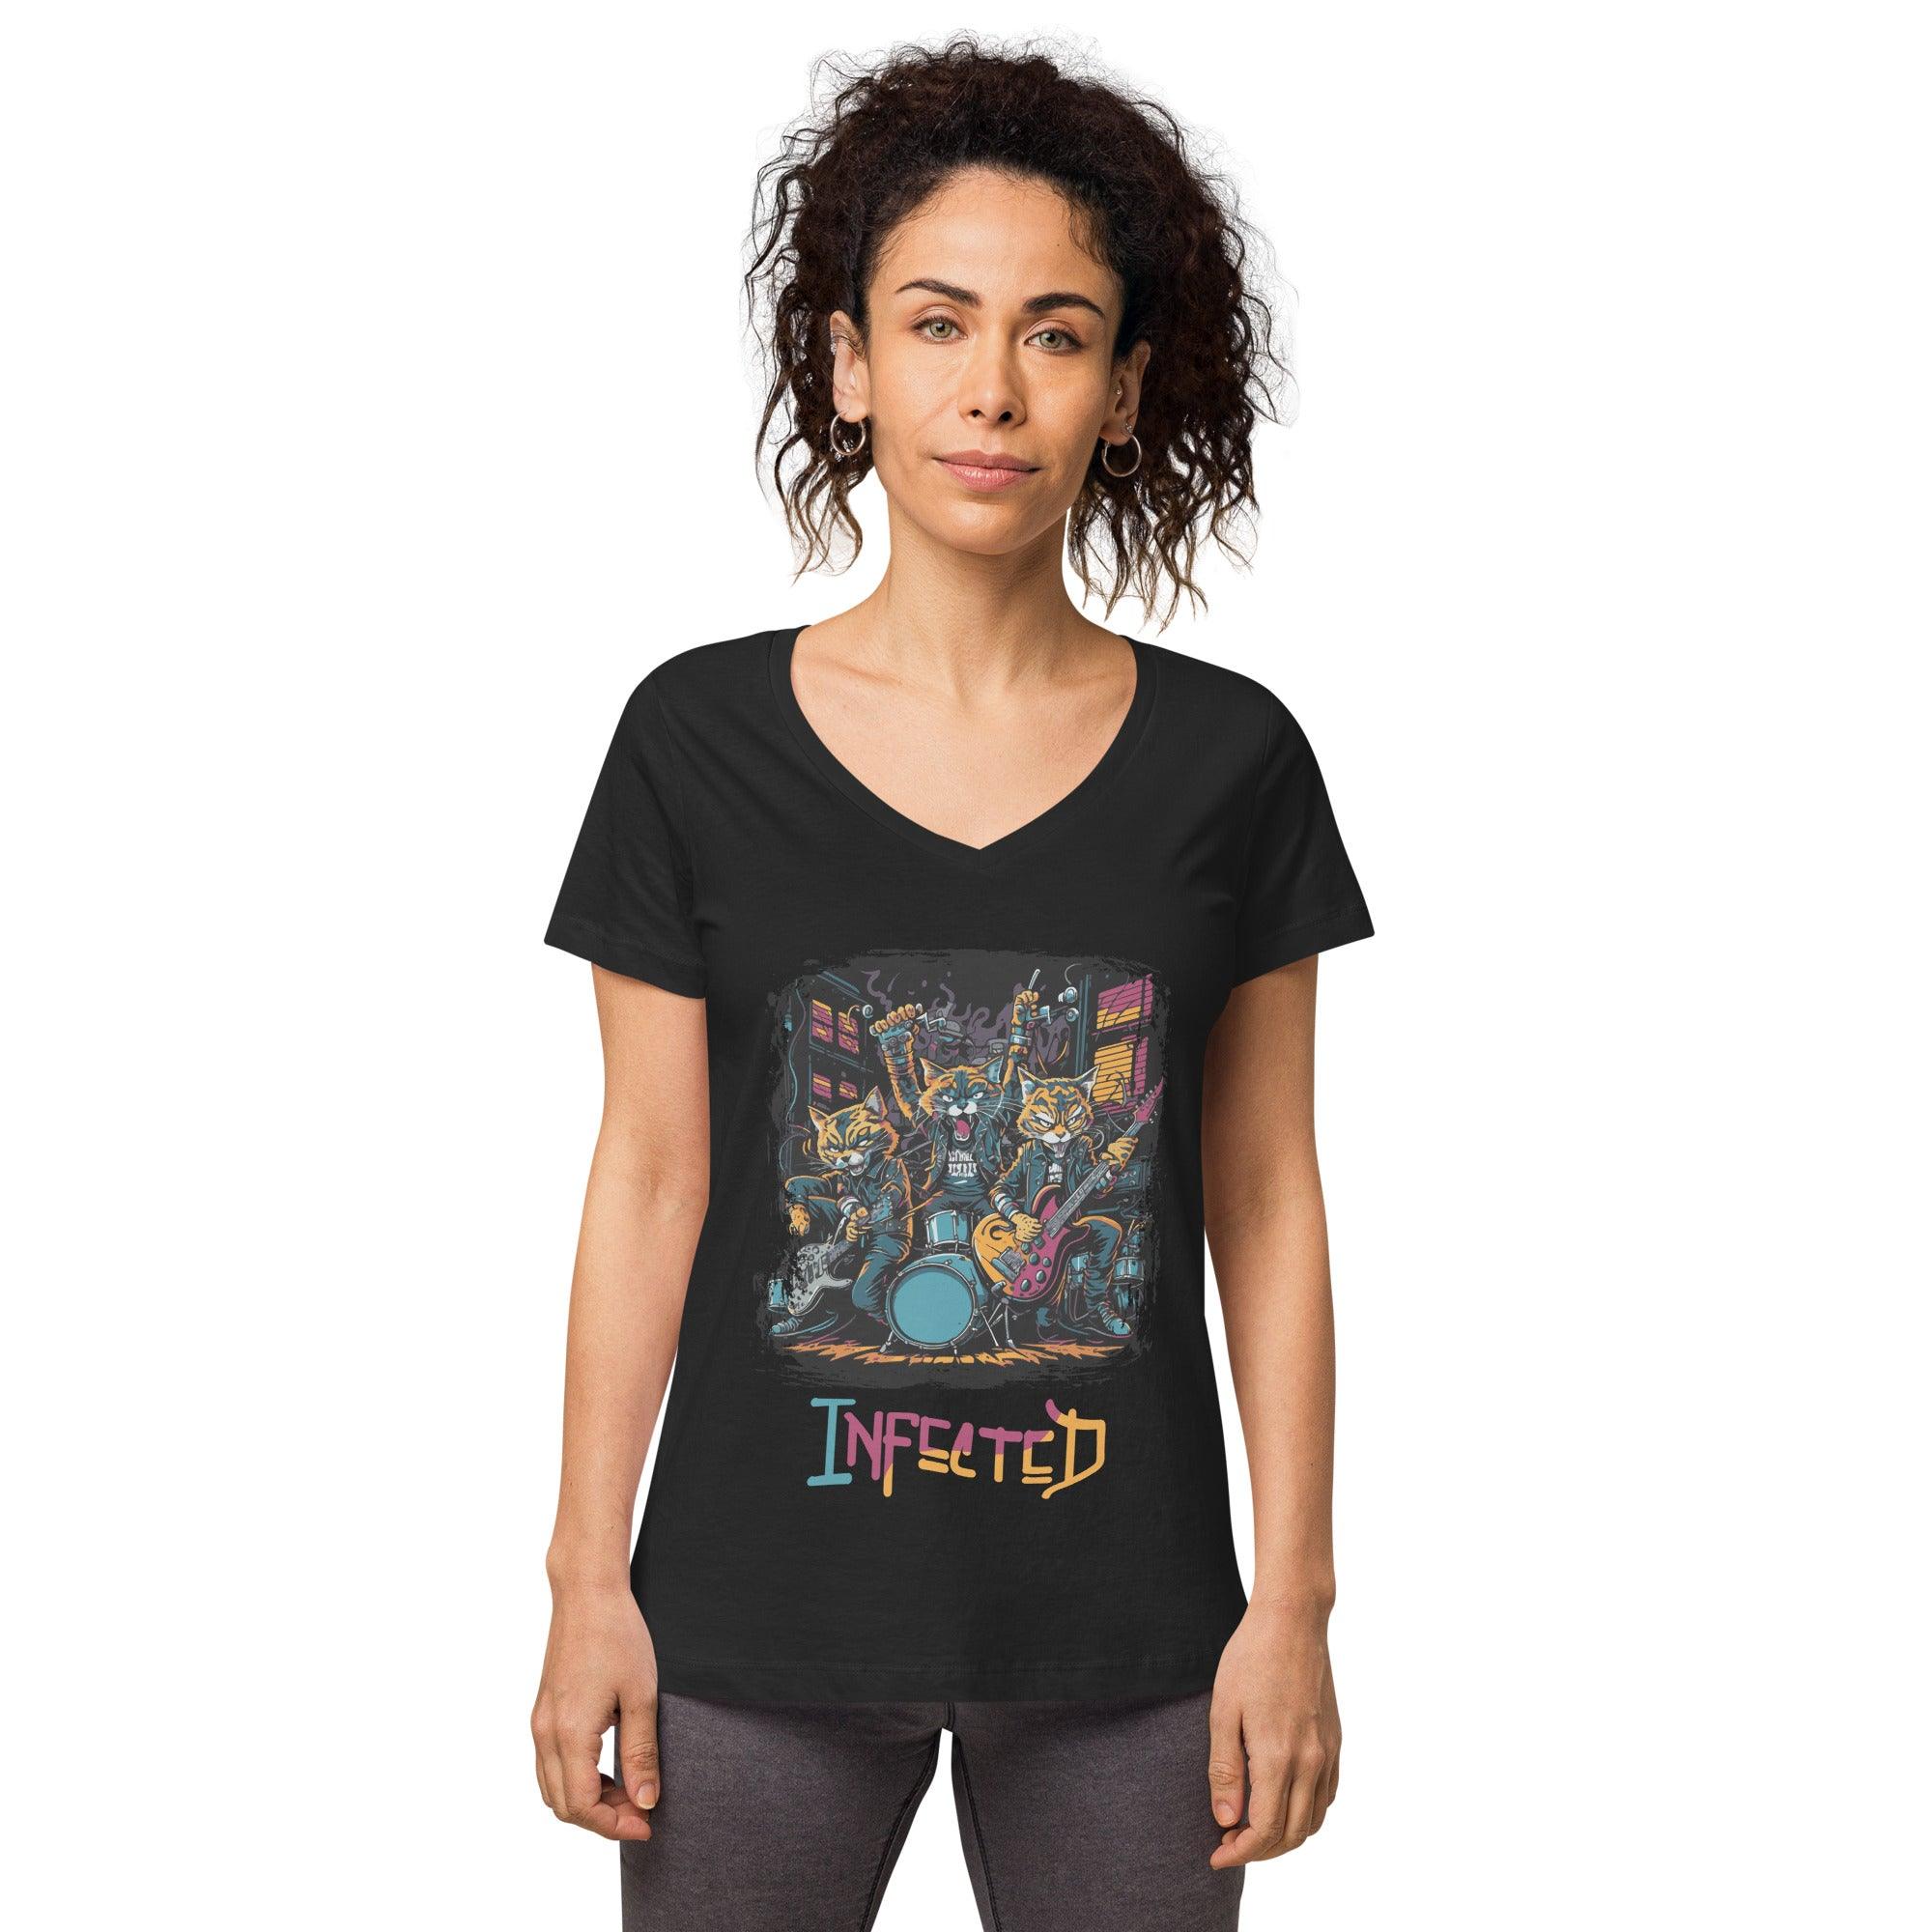 Infected women’s fitted v-neck t-shirt - Beyond T-shirts